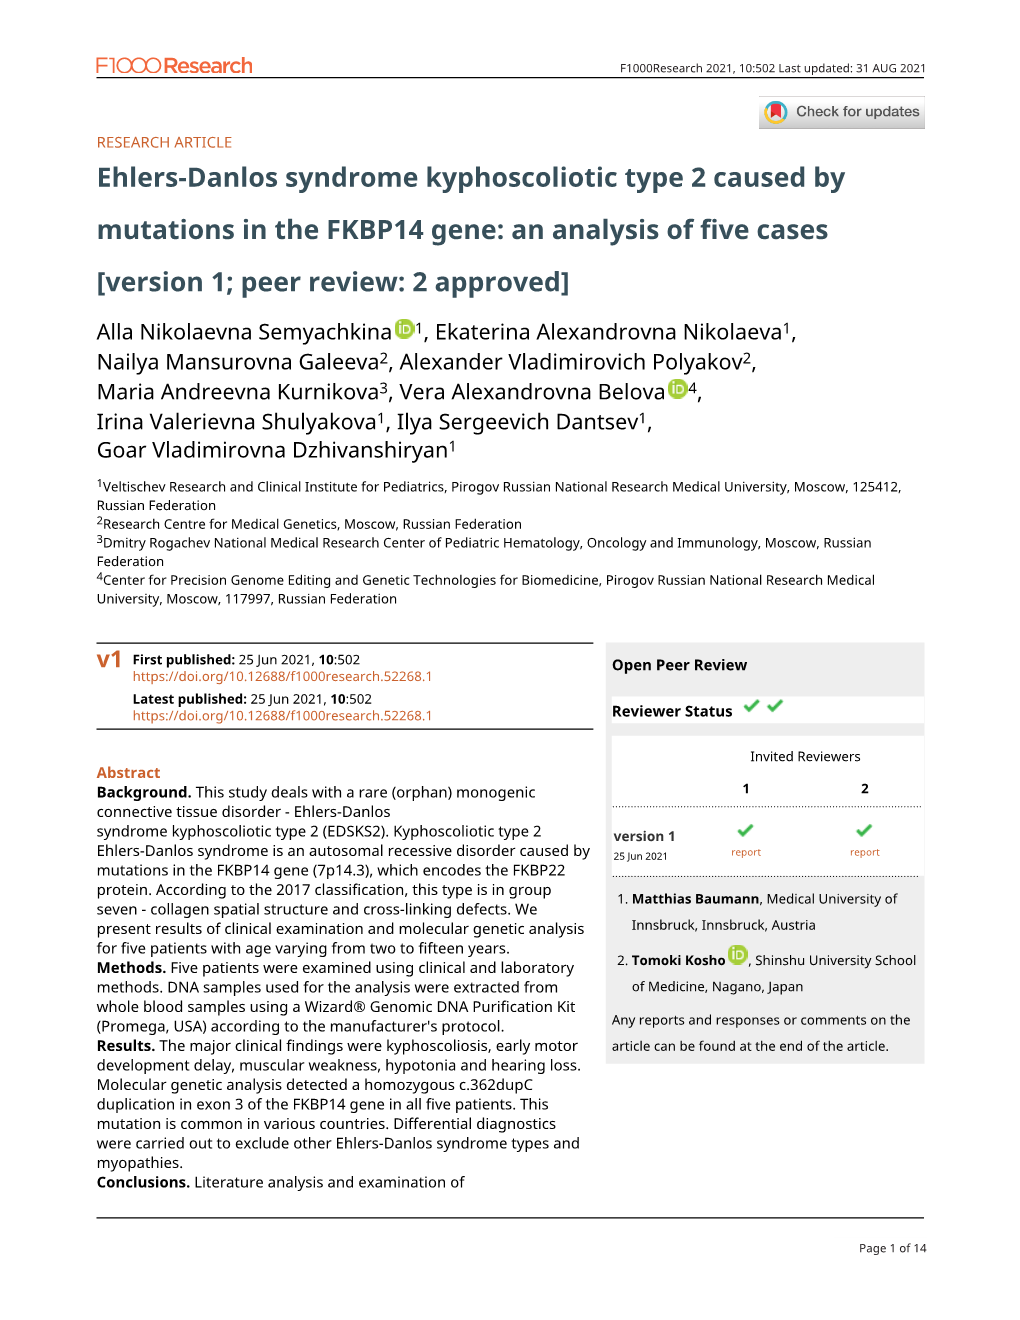 Ehlers-Danlos Syndrome Kyphoscoliotic Type 2 Caused by Mutations in the FKBP14 Gene: an Analysis of Five Cases [Version 1; Peer Review: 2 Approved]